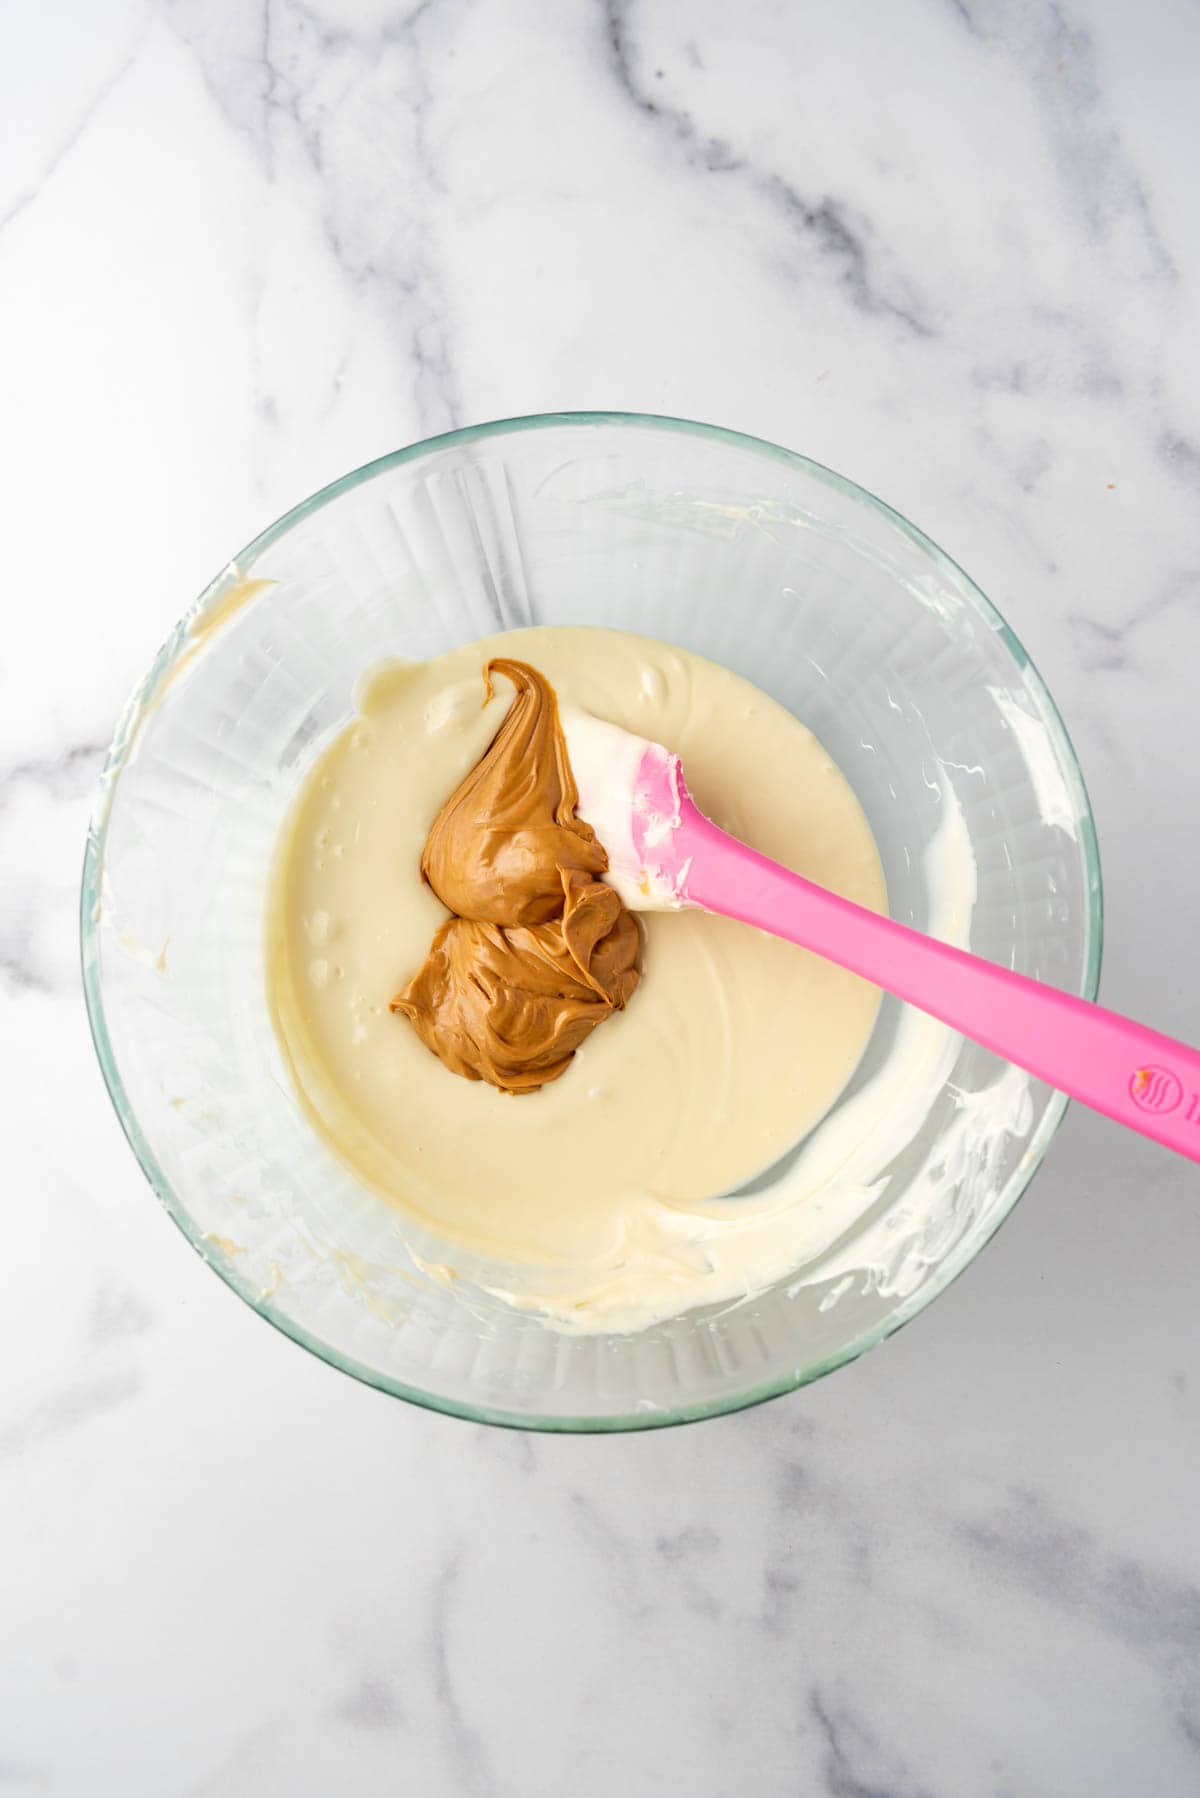 An image of creamy peanut butter being added to melted white chocolate in a large glass mixing bowl with a pink spatula.